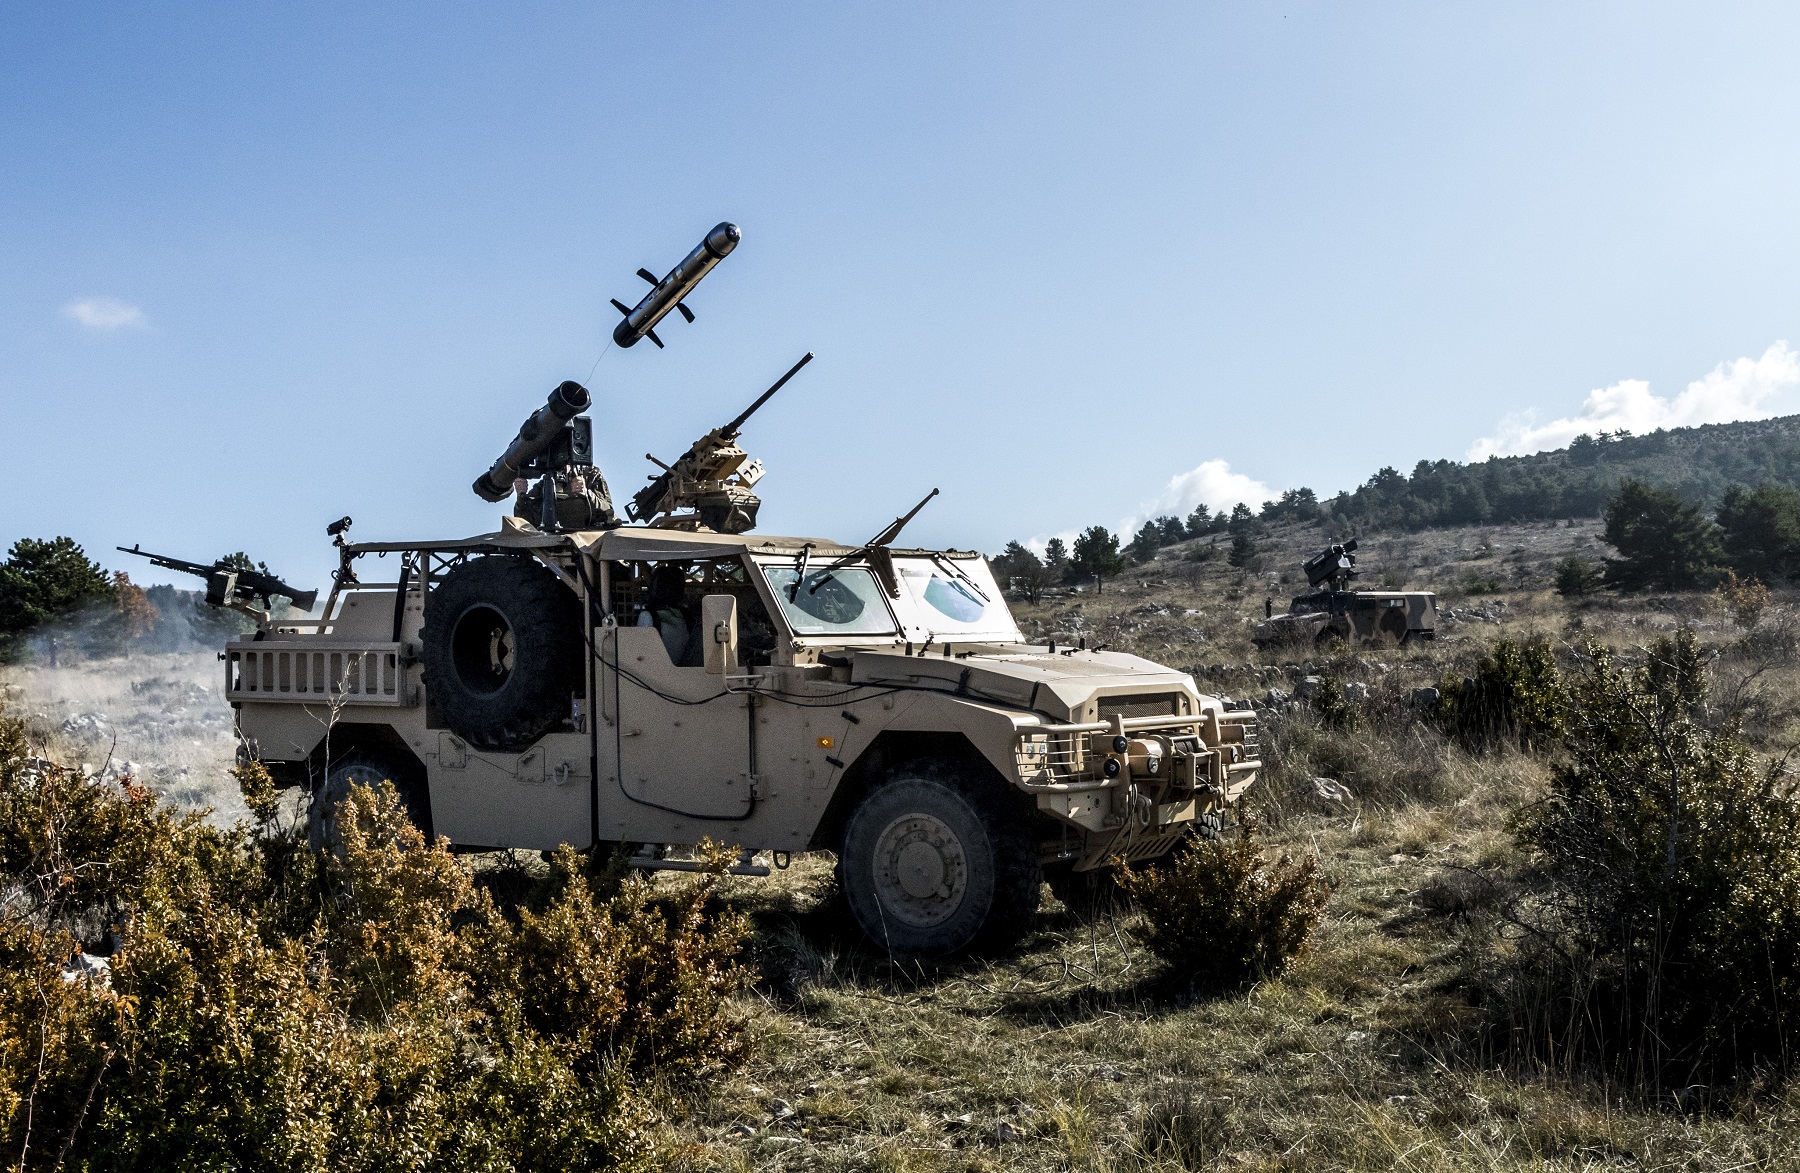 First Firing of MBDA MMP Anti-Tank Guided Missile from ARQUUS Sabre Special Forces Vehicle